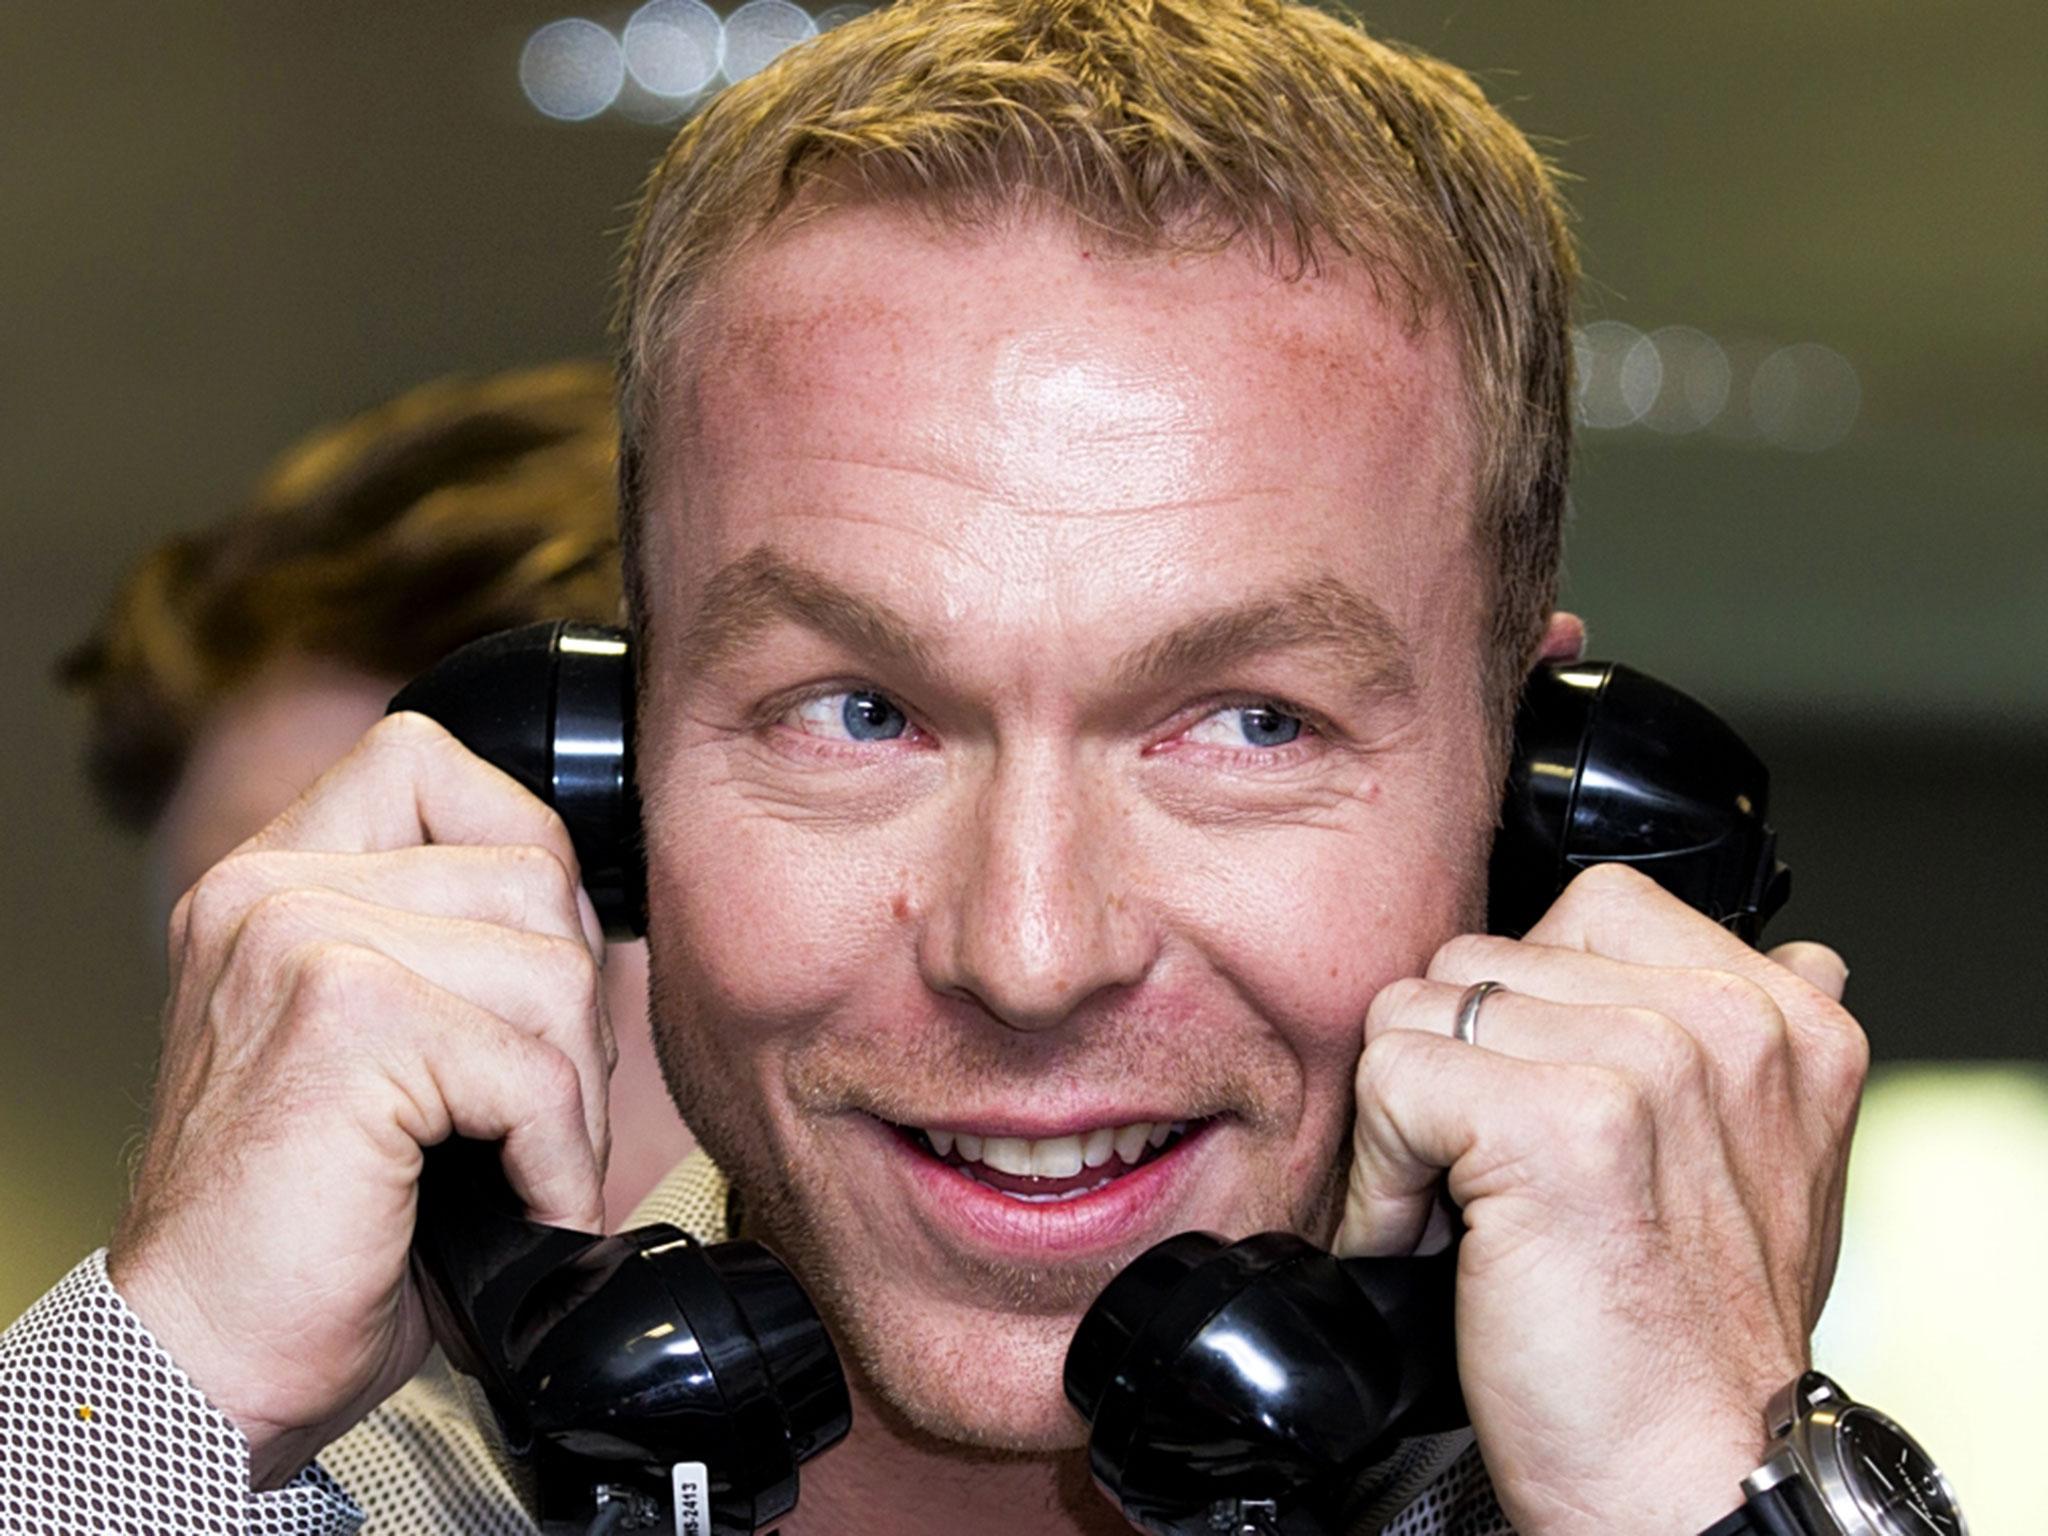 ‘Hello, Butlers in the Buff Glasgow office, Chris Hoy speaking...’